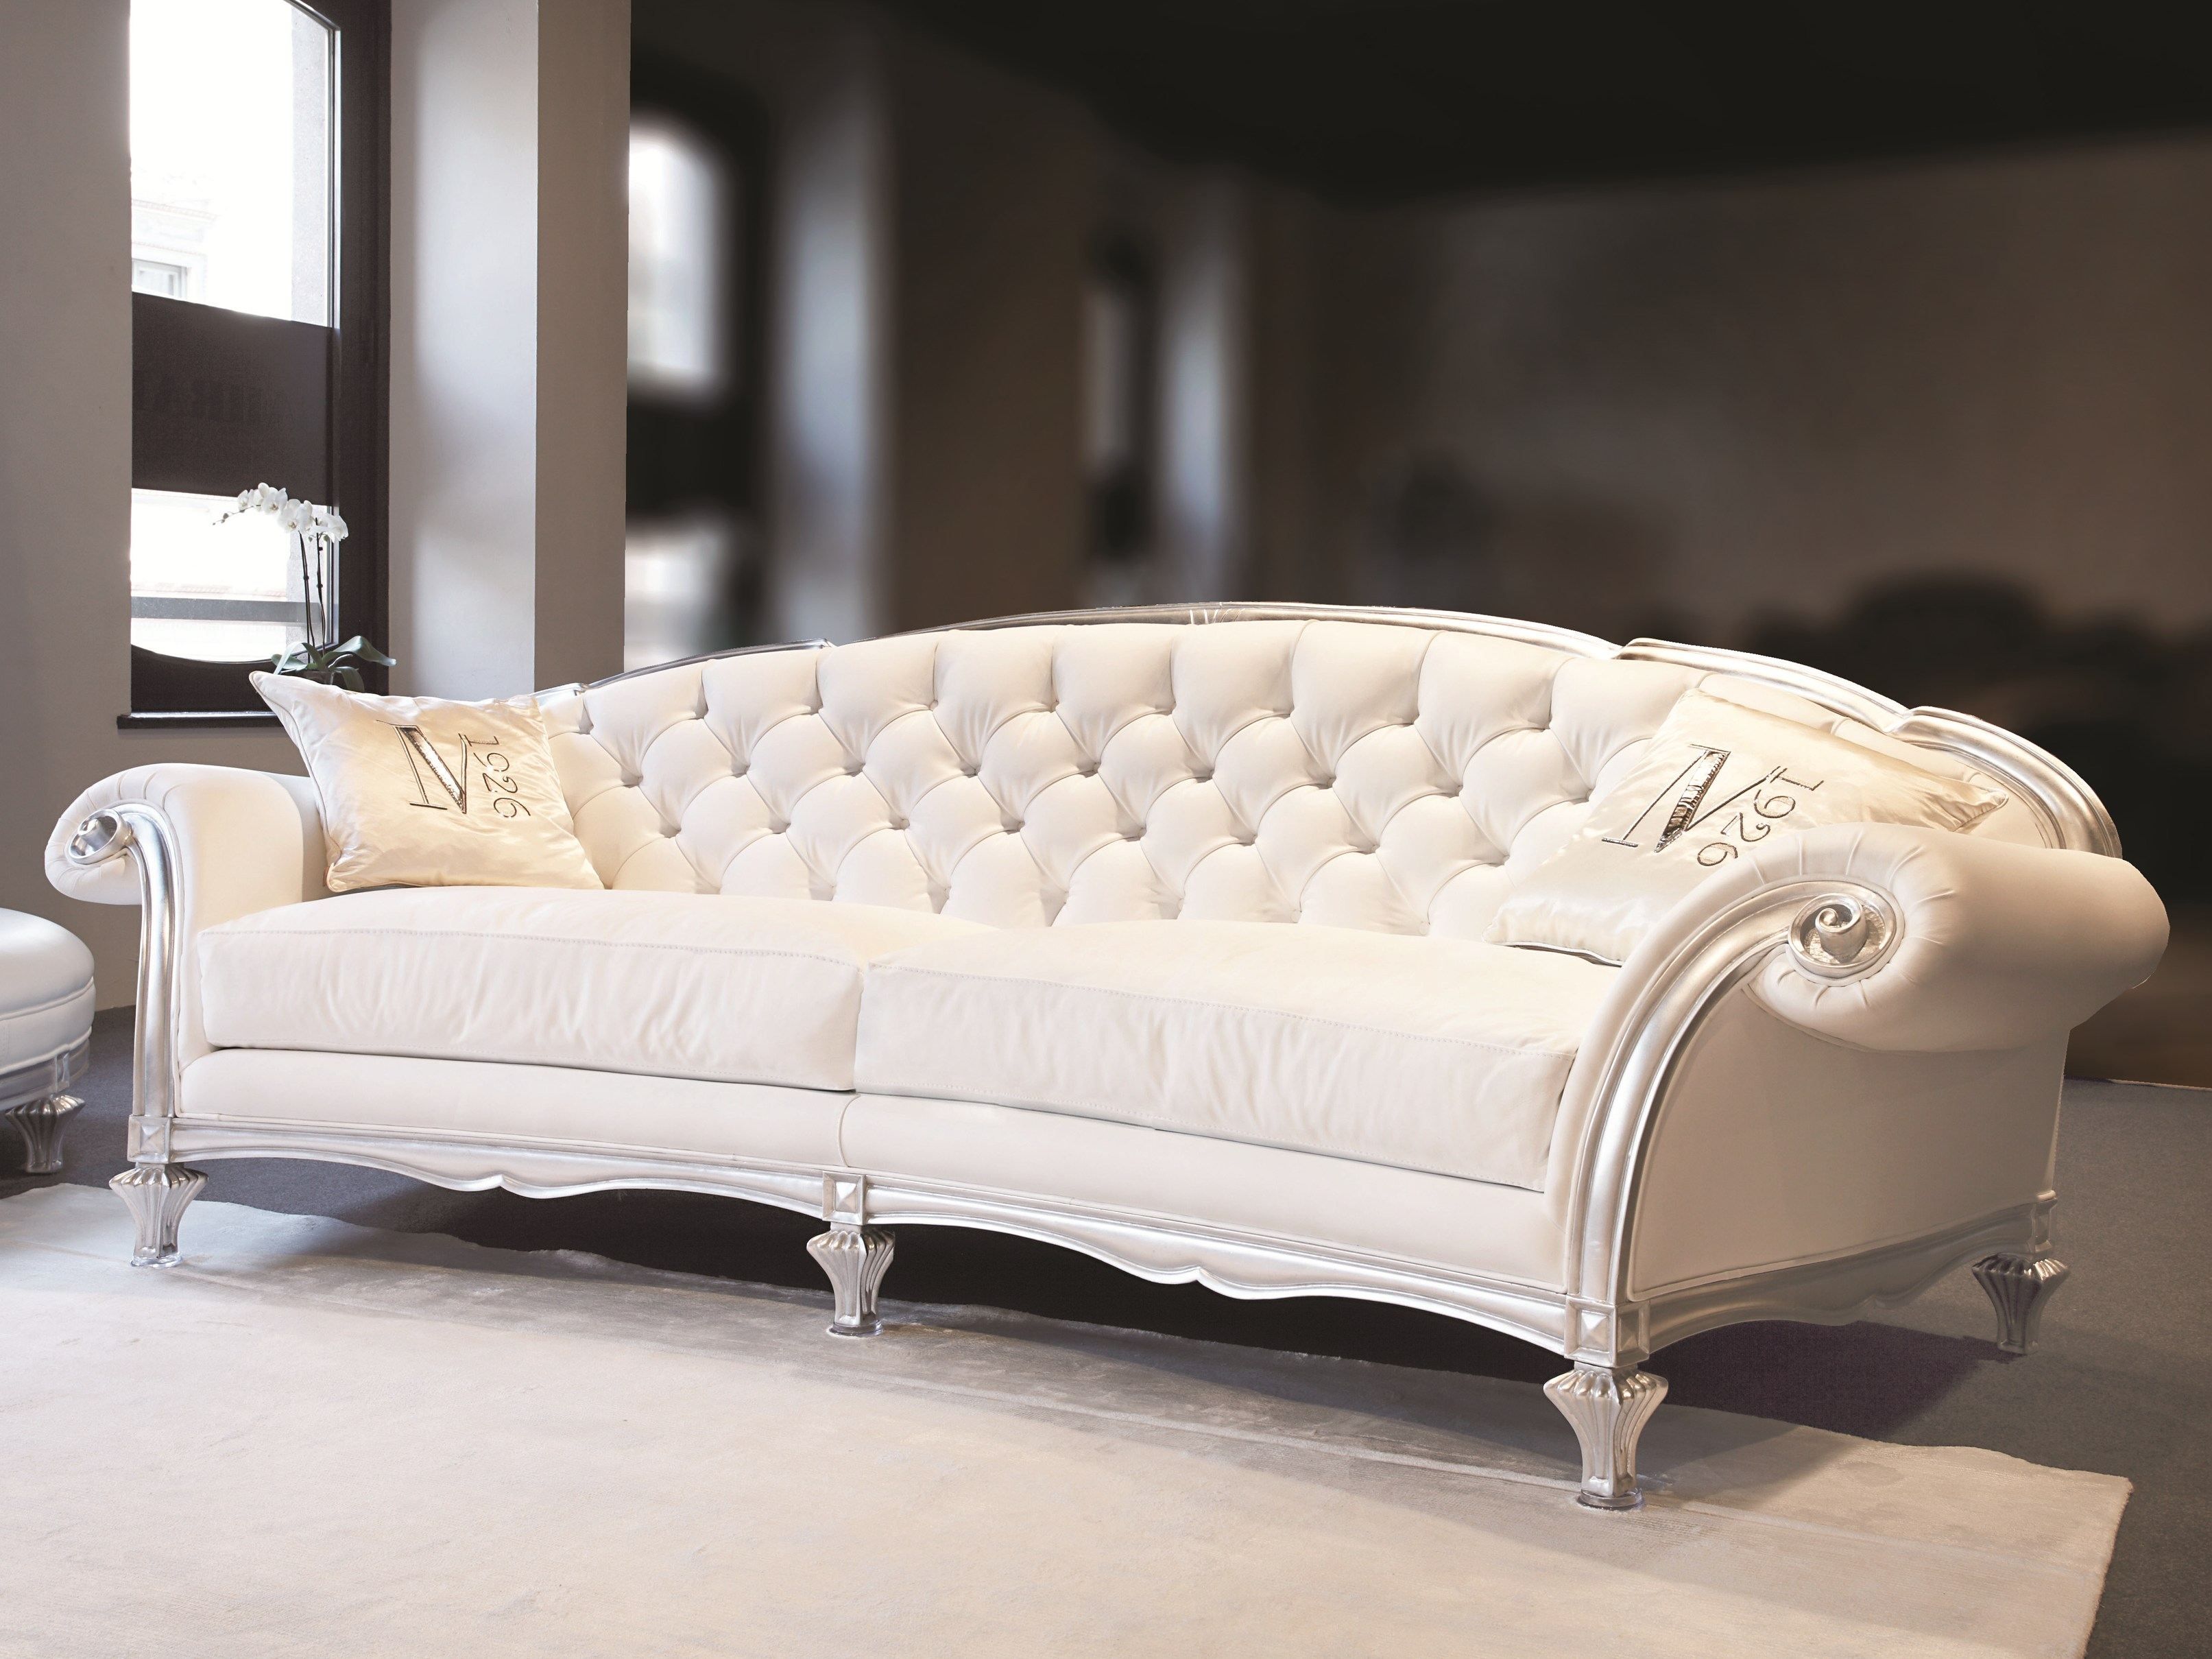 Httproombowlwondrous Interesting Leather Furniture Design Pertaining To Elegant Sofas And Chairs (View 6 of 15)